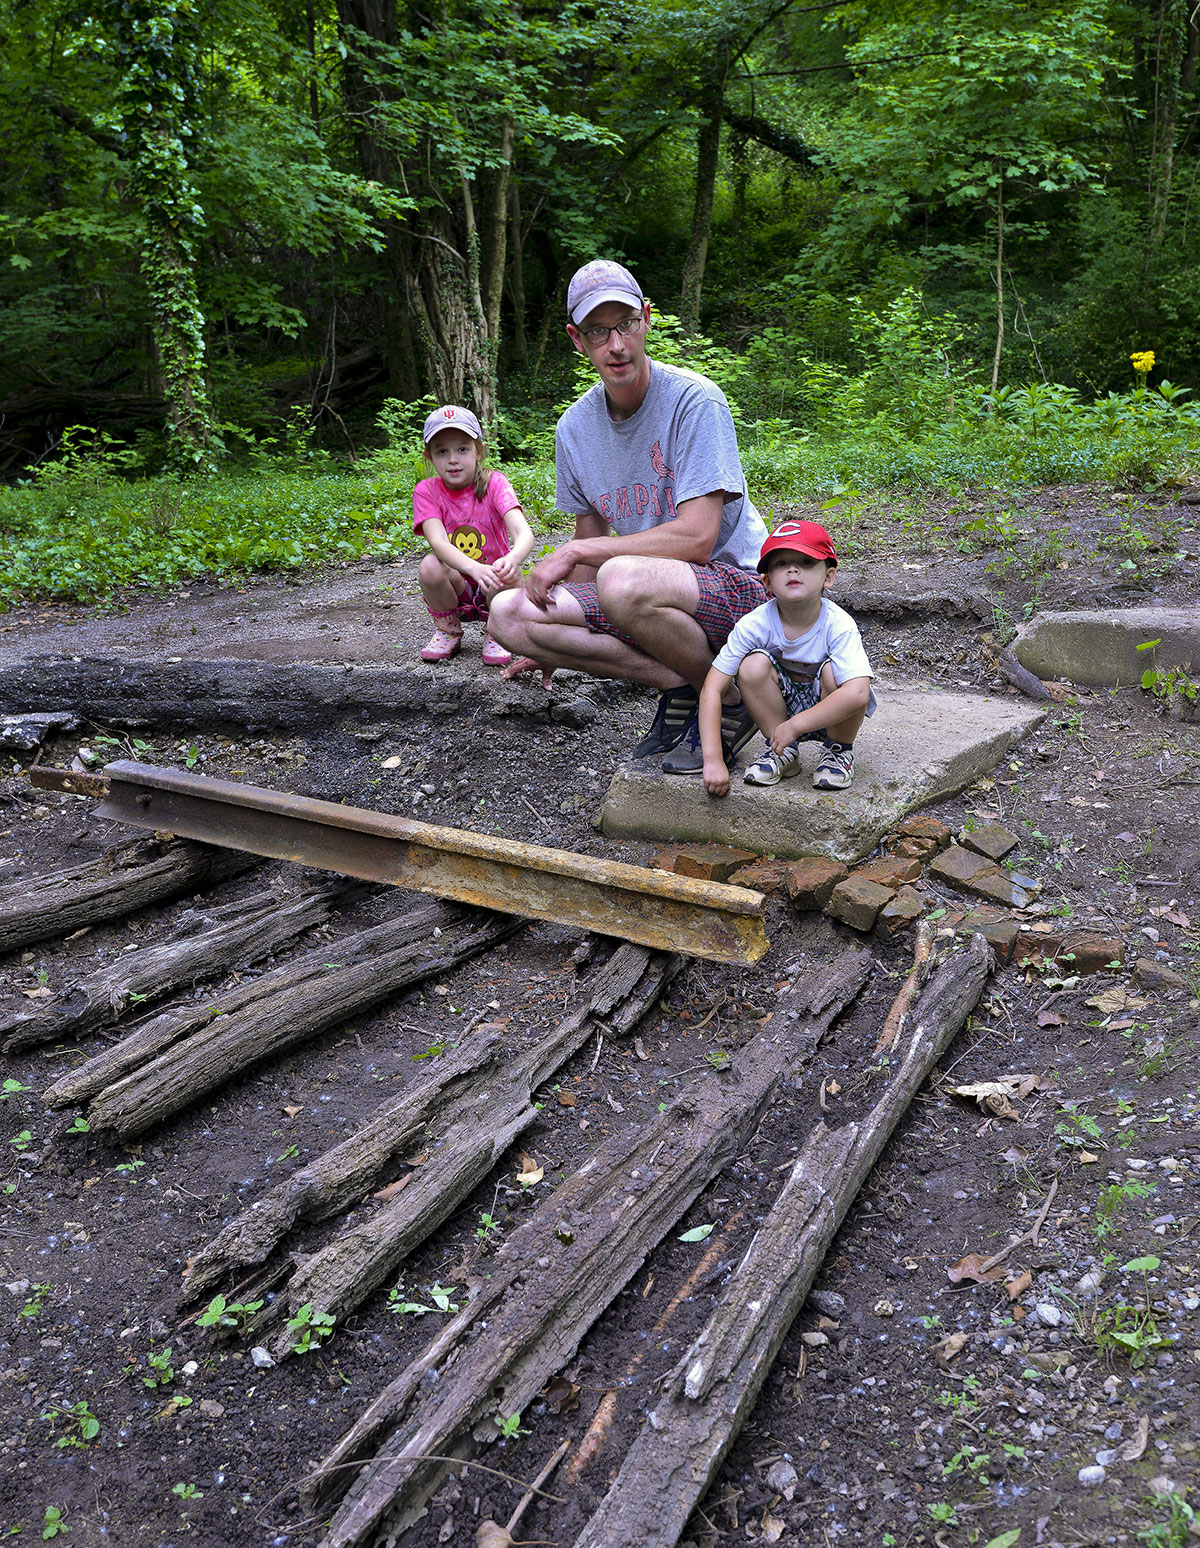 Jason Meyer and his children enjoy viewing the old cross ties, which date back to the 1890’s.